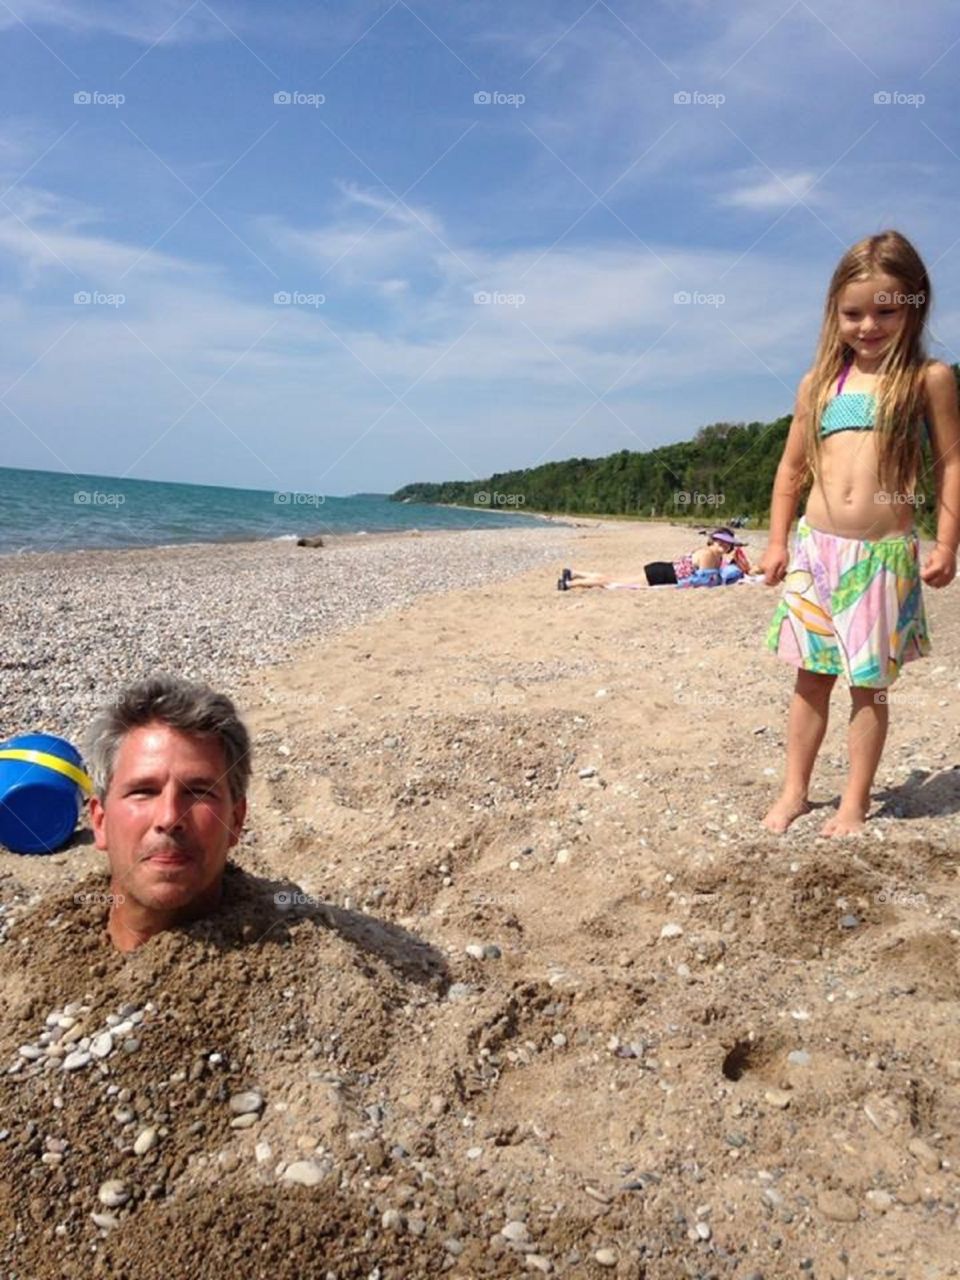 Silliness at the beach. Toronto Canada 